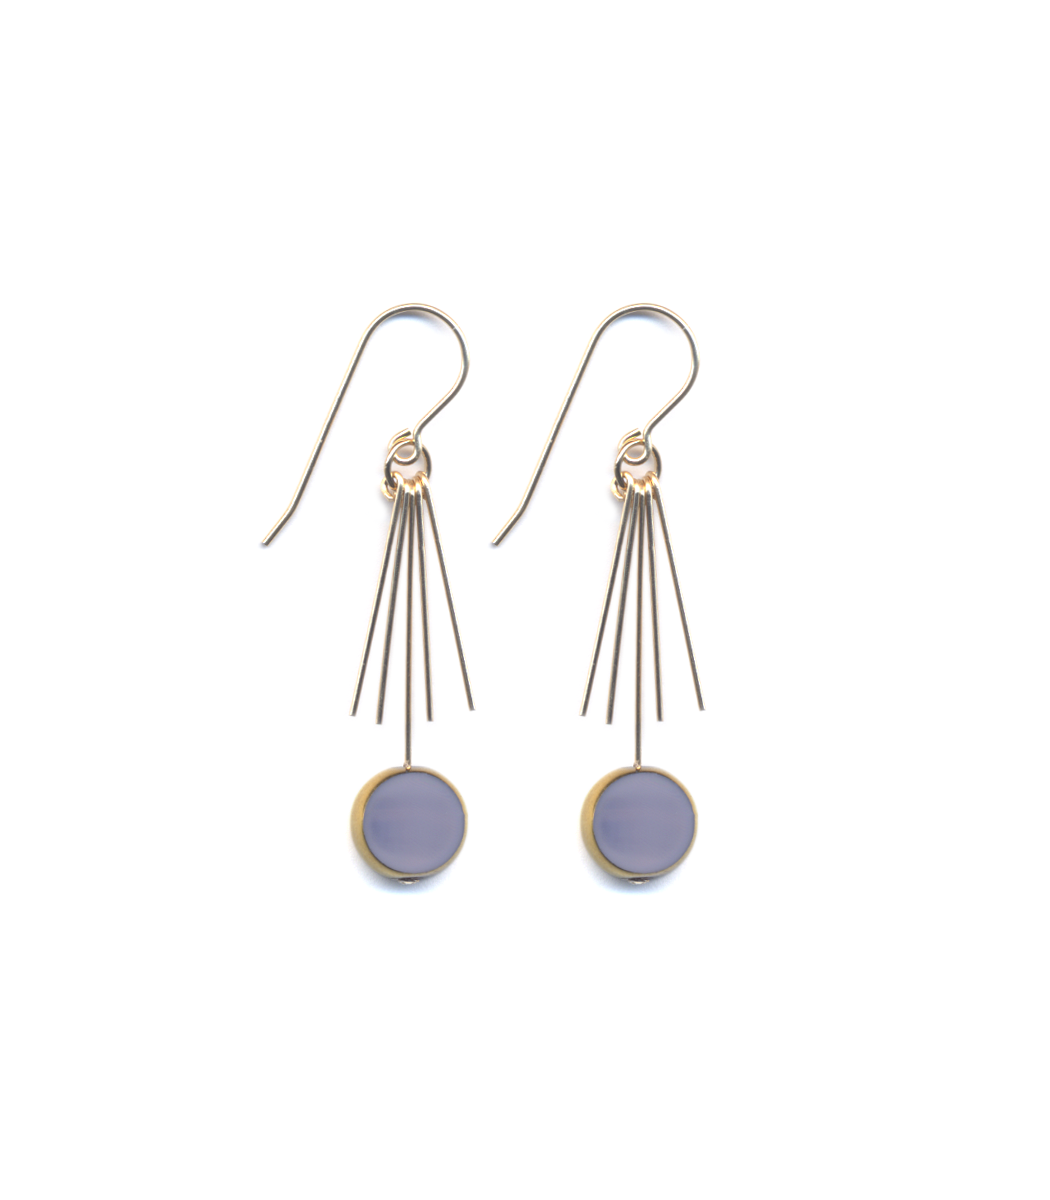 E1833 Lavender Circle with Gold Fringe Earrings